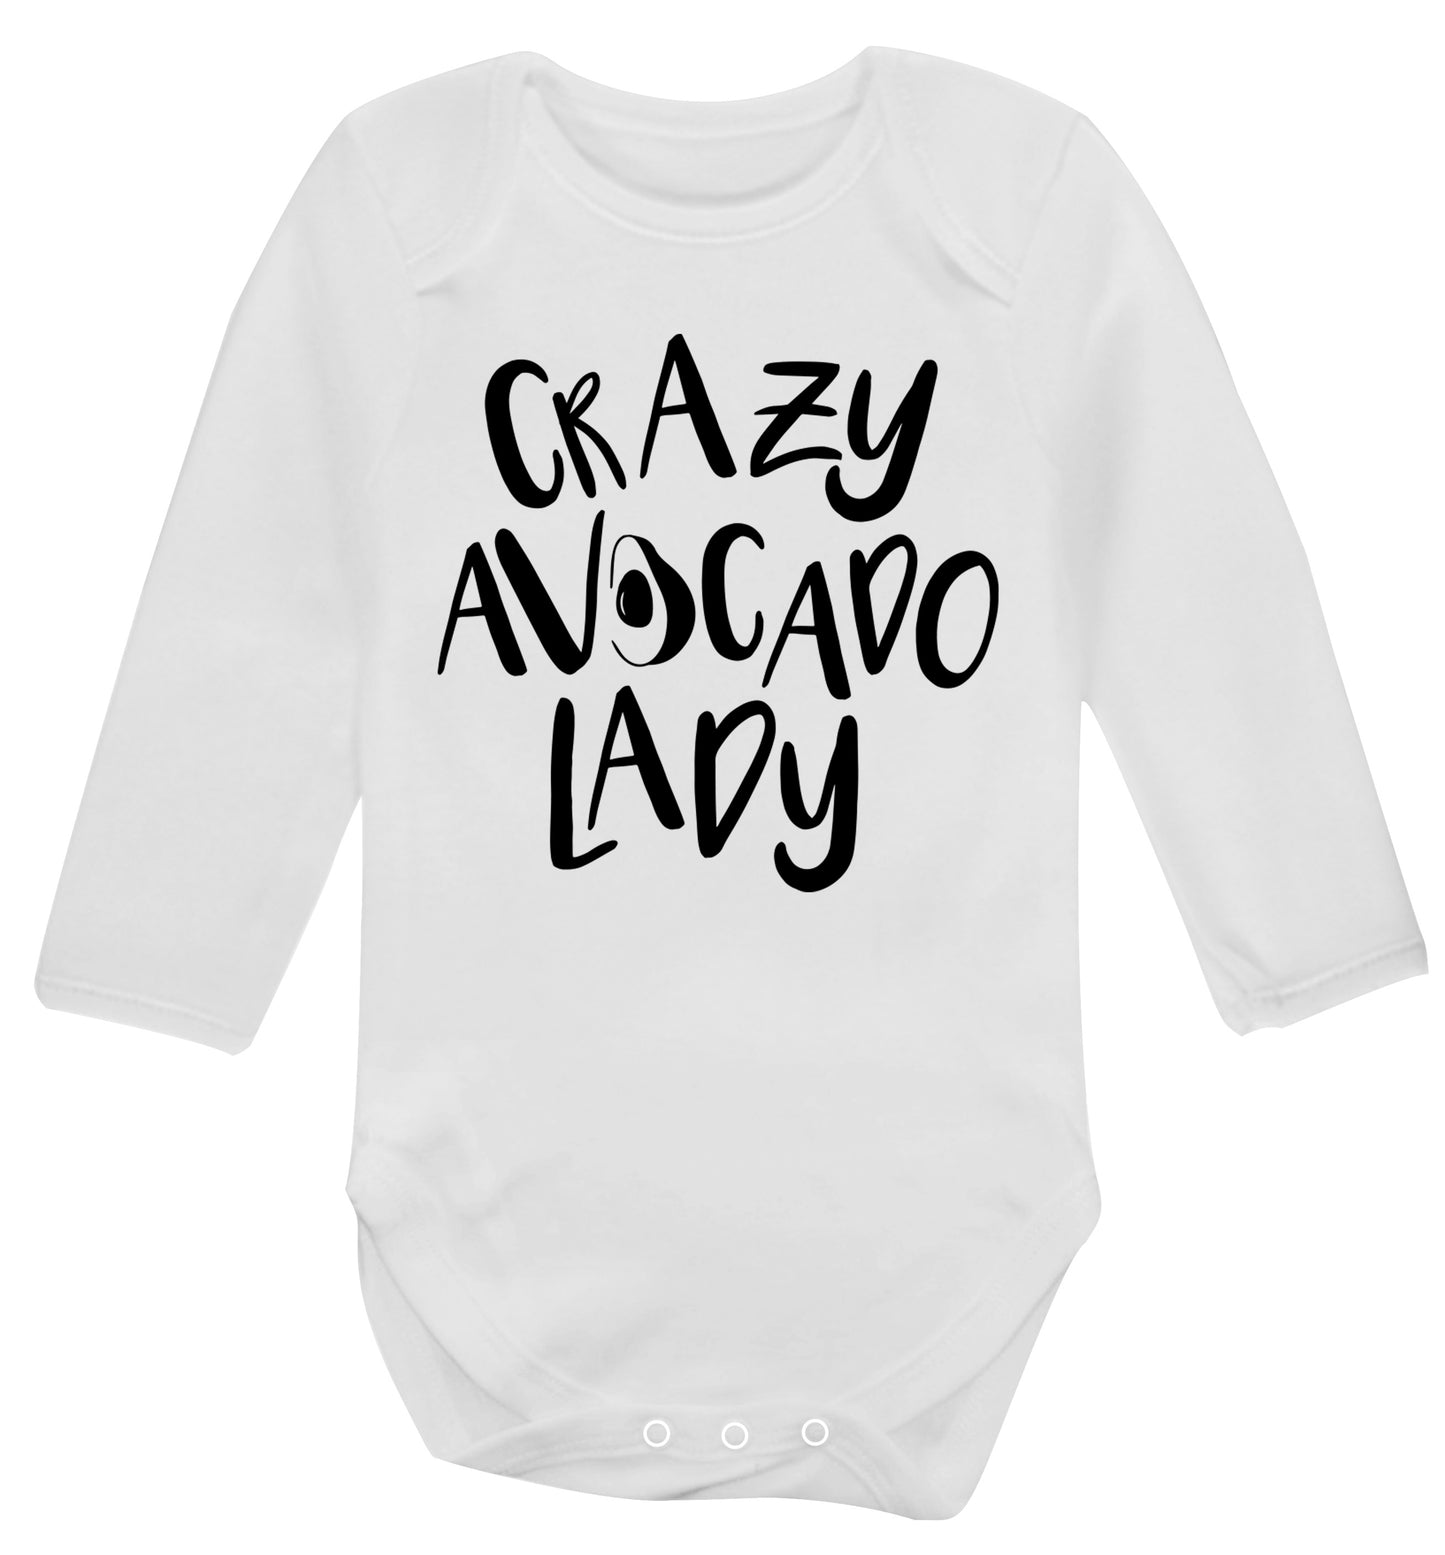 Crazy avocado lady Baby Vest long sleeved white 6-12 months